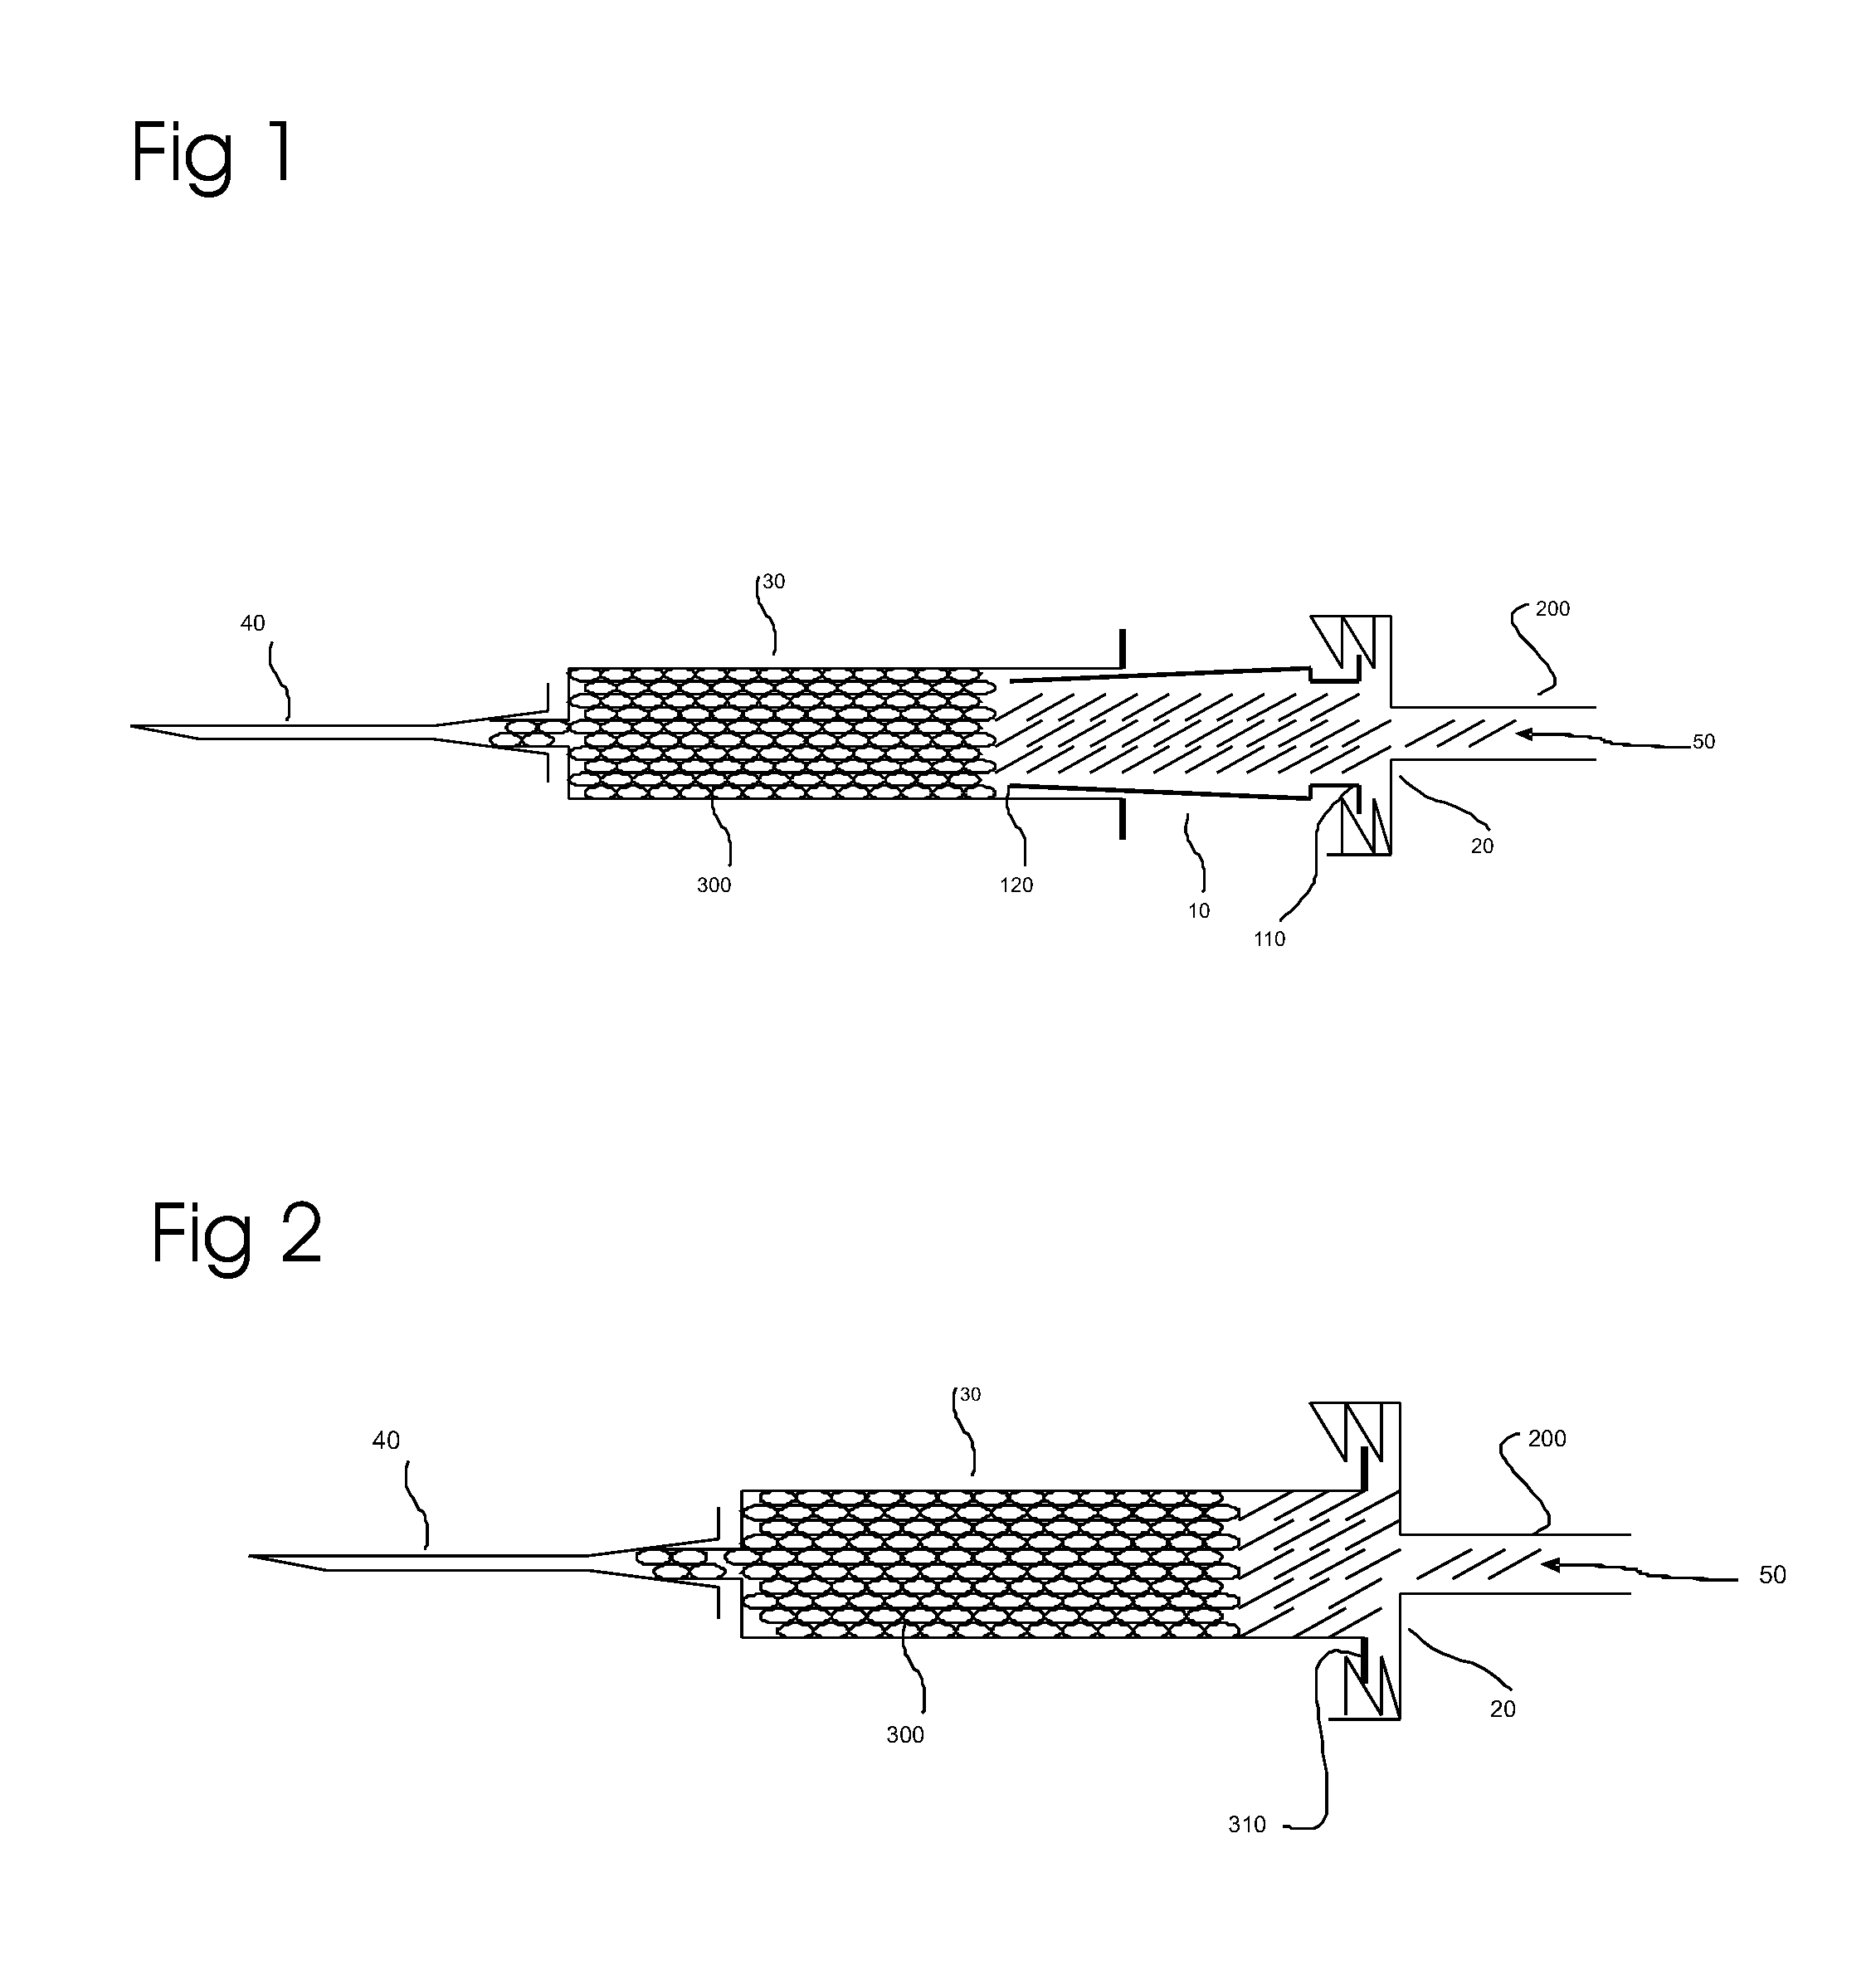 Adapter device for application of small amounts of fat graft material by use of syringes